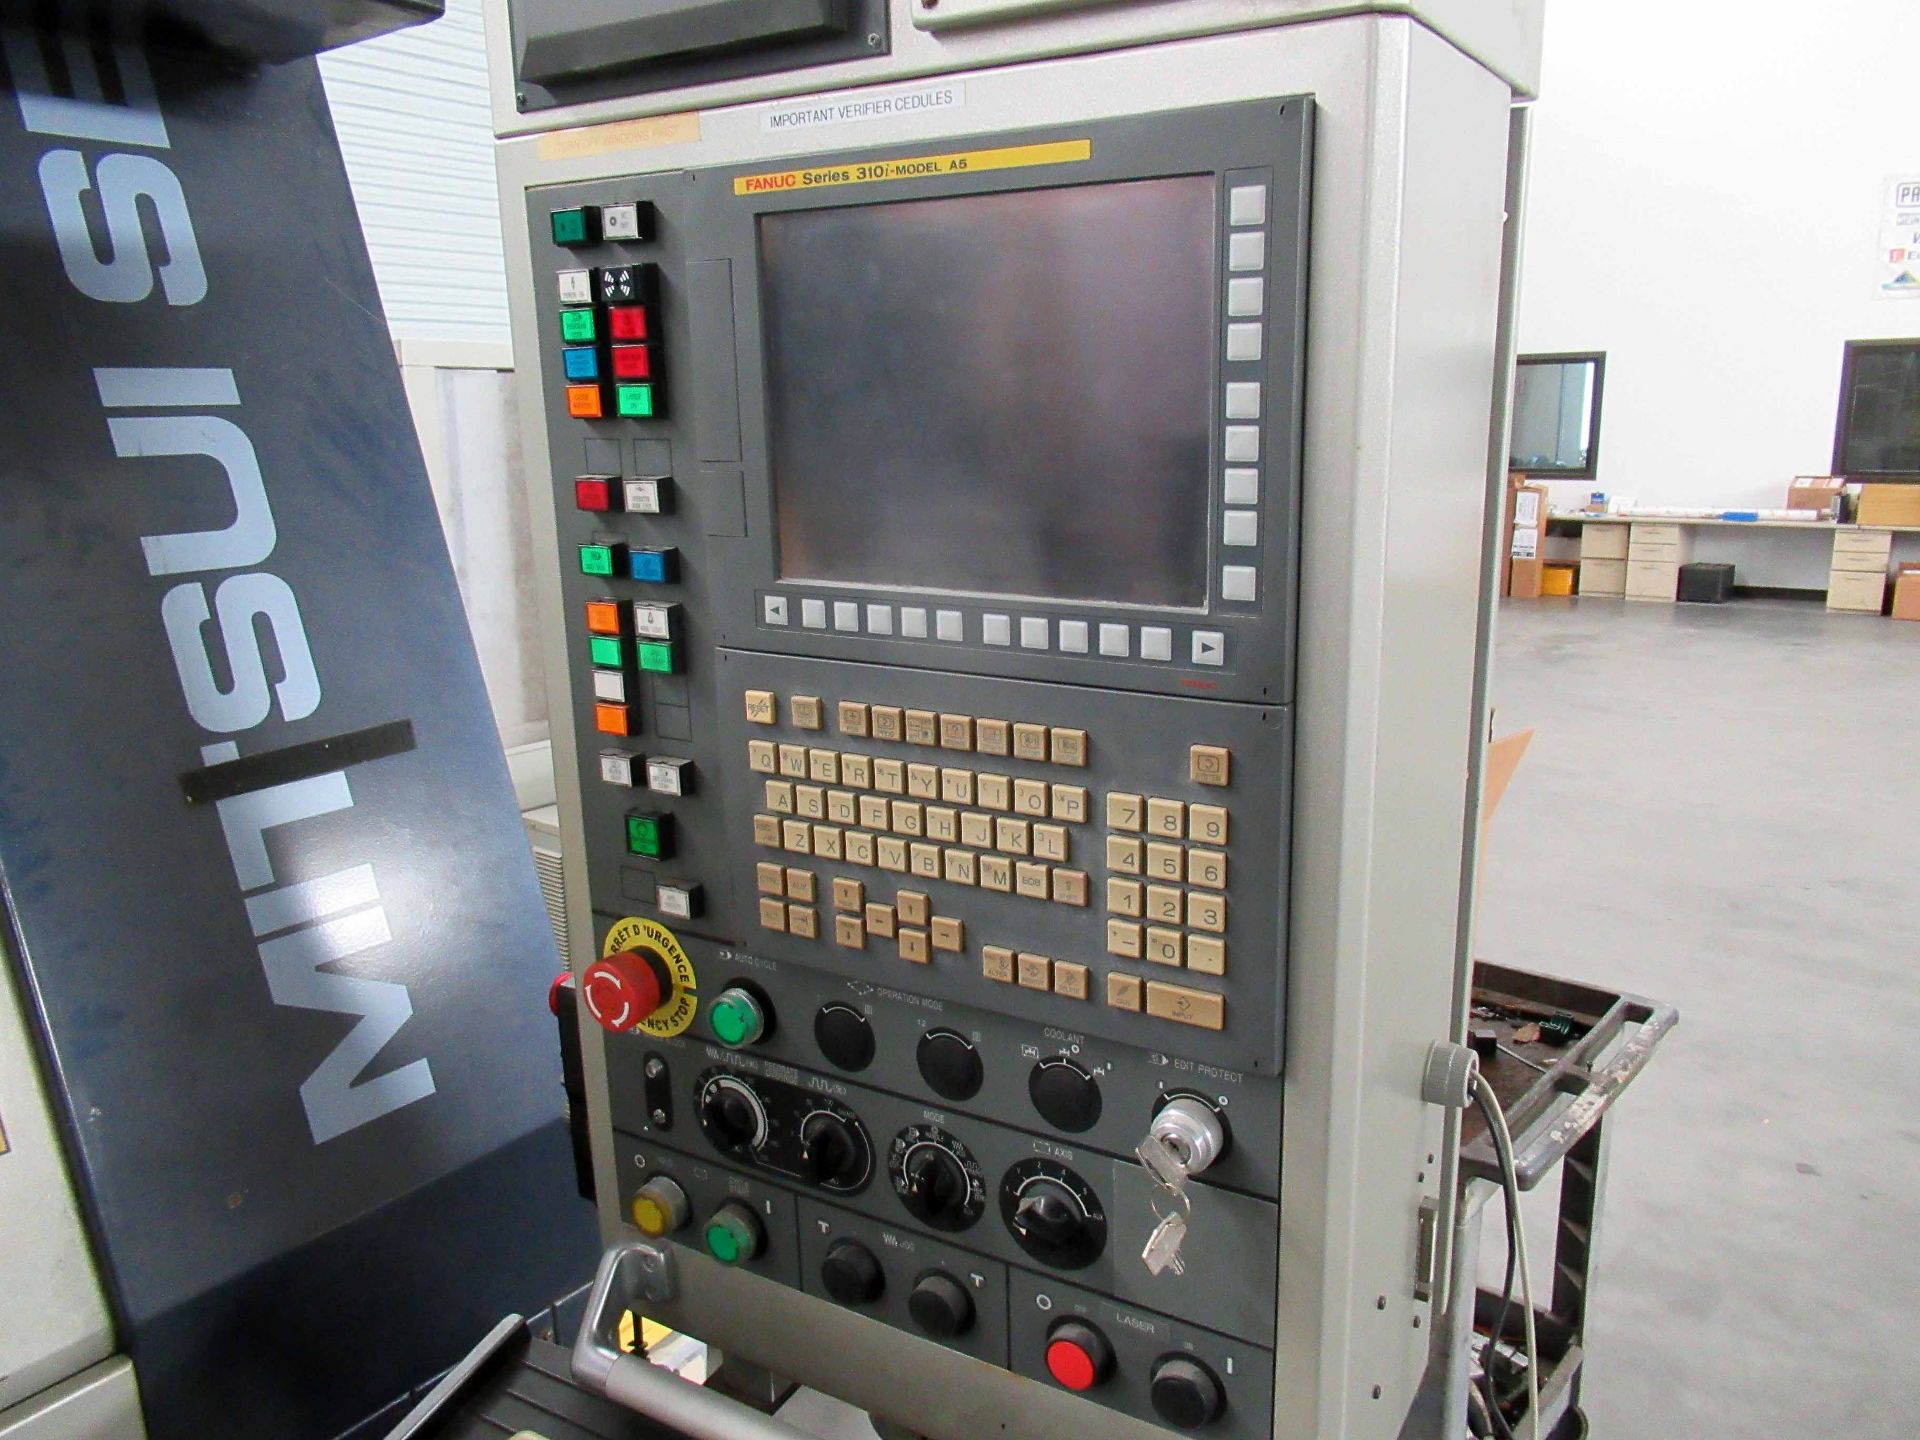 5-AXIS CNC LASER DRILLING MACHINE, MITSUI SEIKI MDL. VLD-300, new 2008, Fanuc series 310i- Mdl. A5 - Image 2 of 9